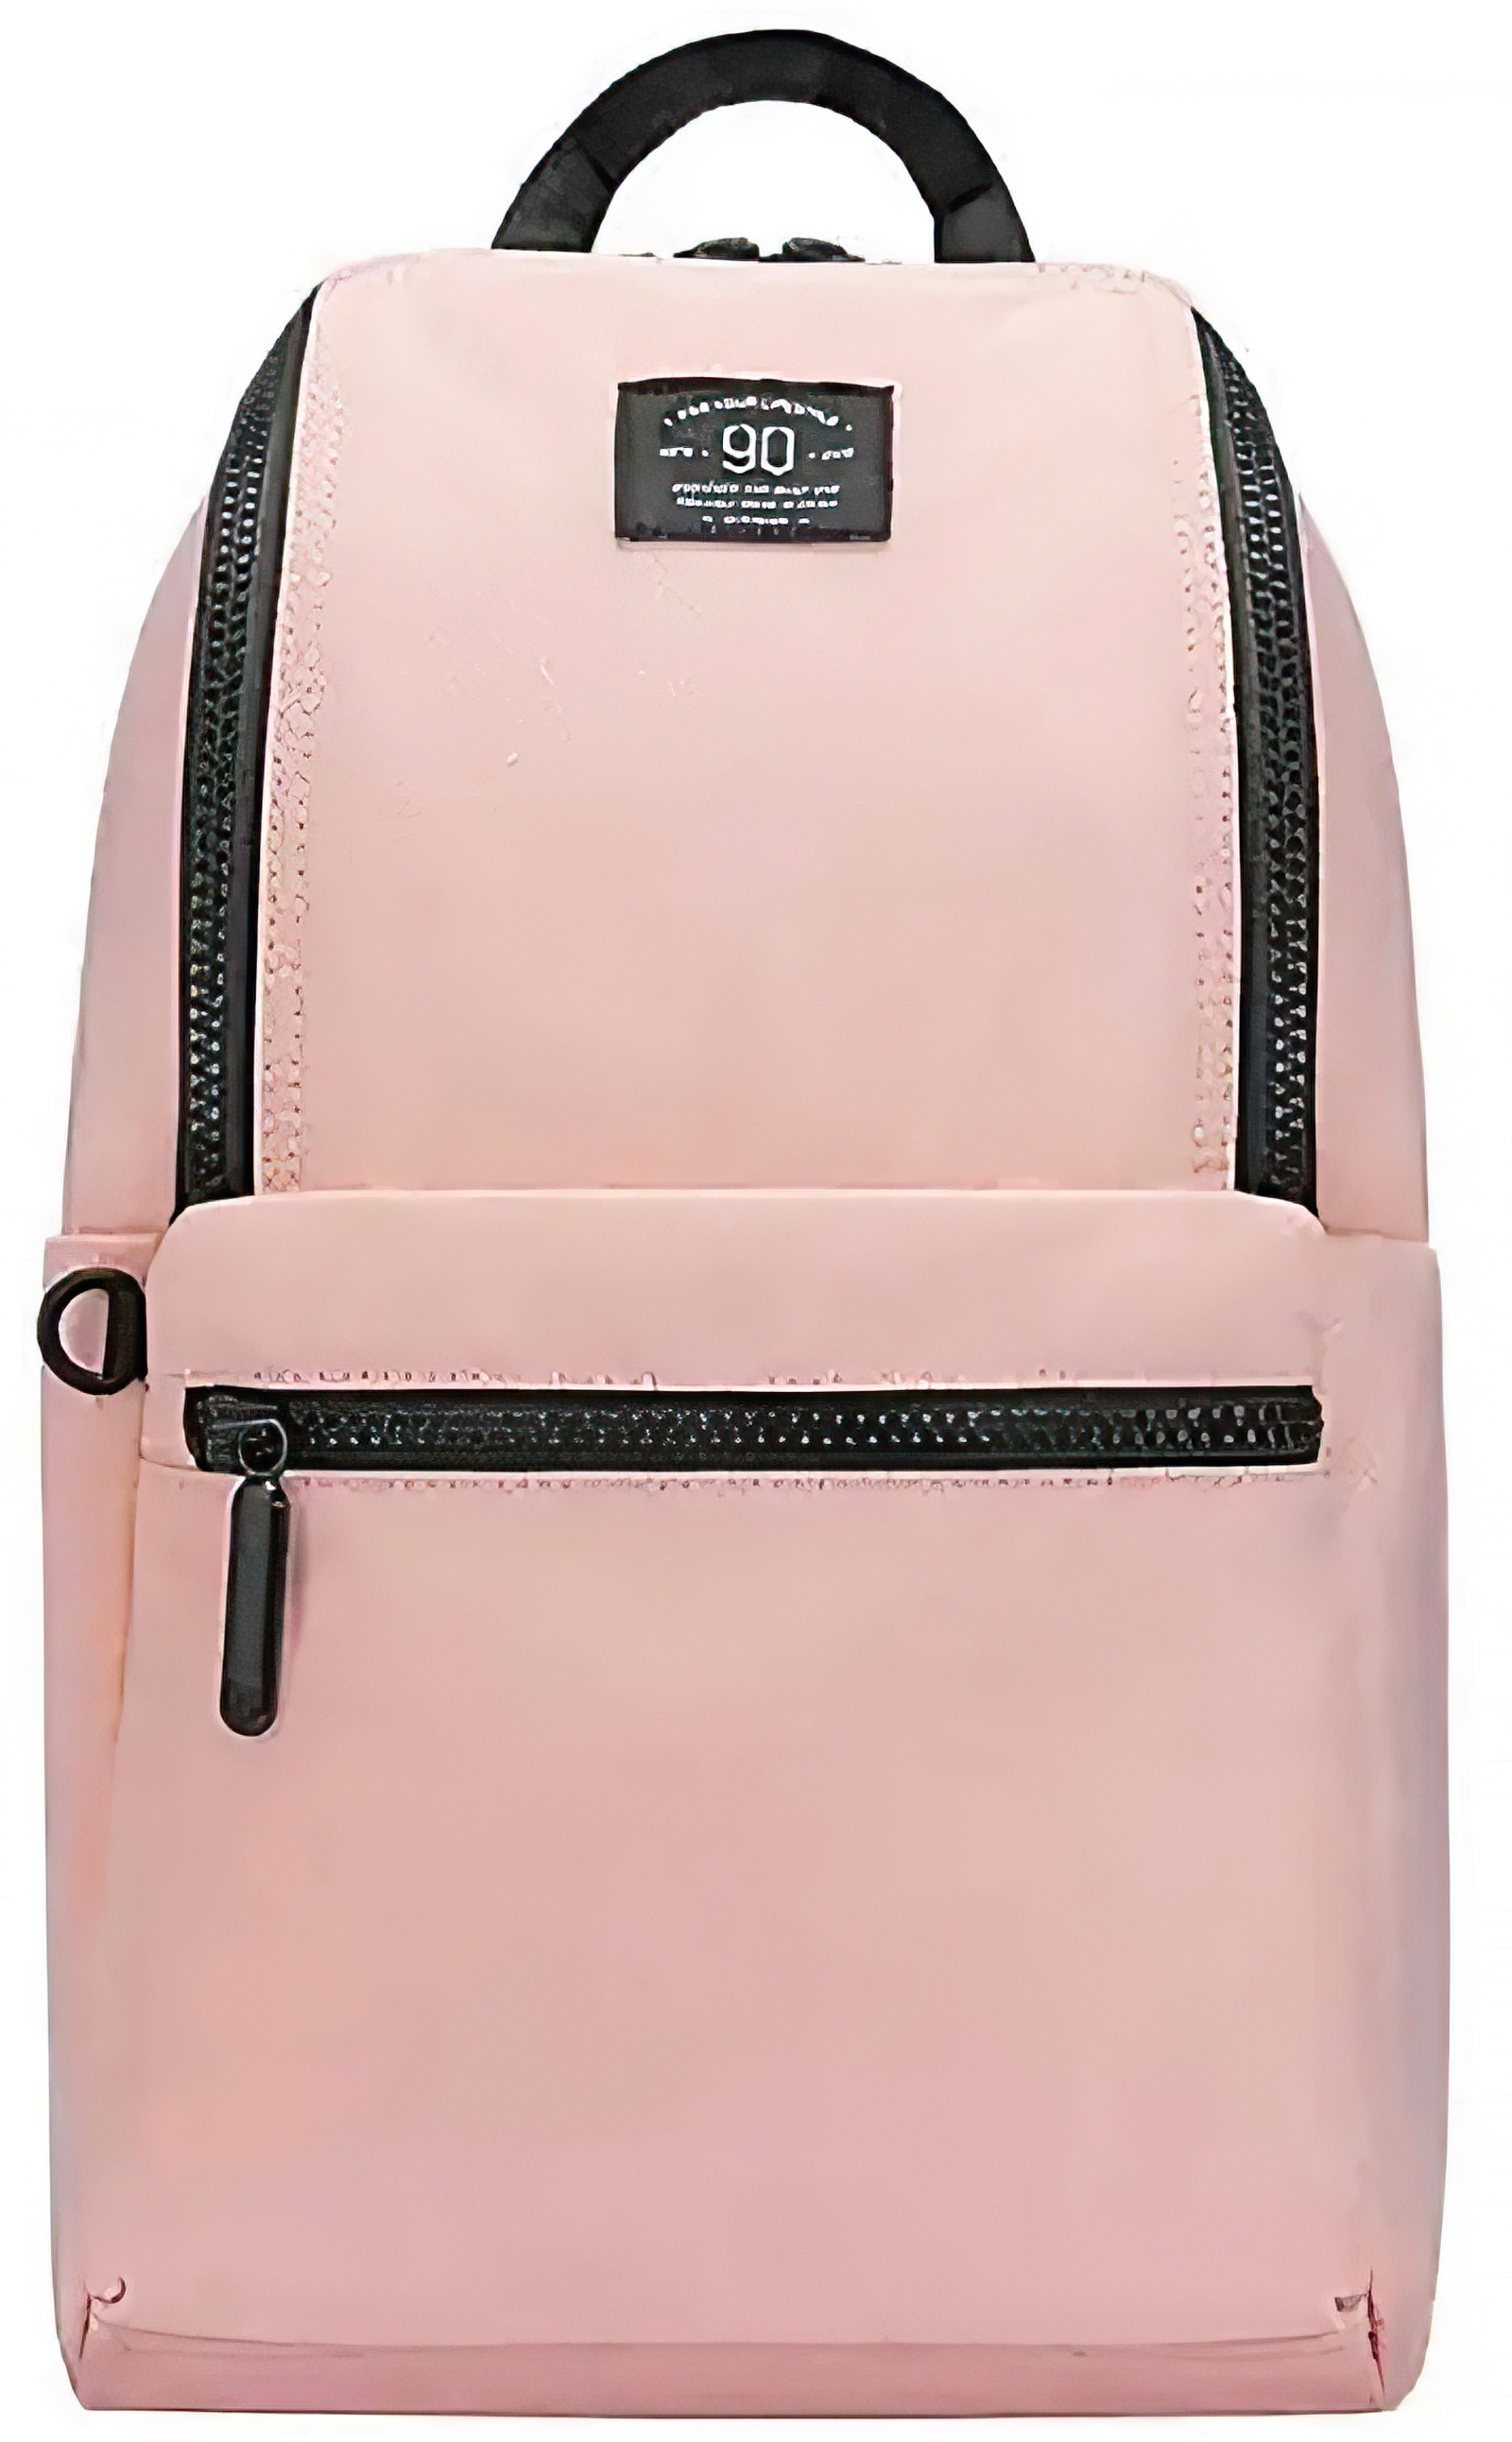 фото Рюкзак xiaomi 90 points pro leisure travel backpack 10l pink